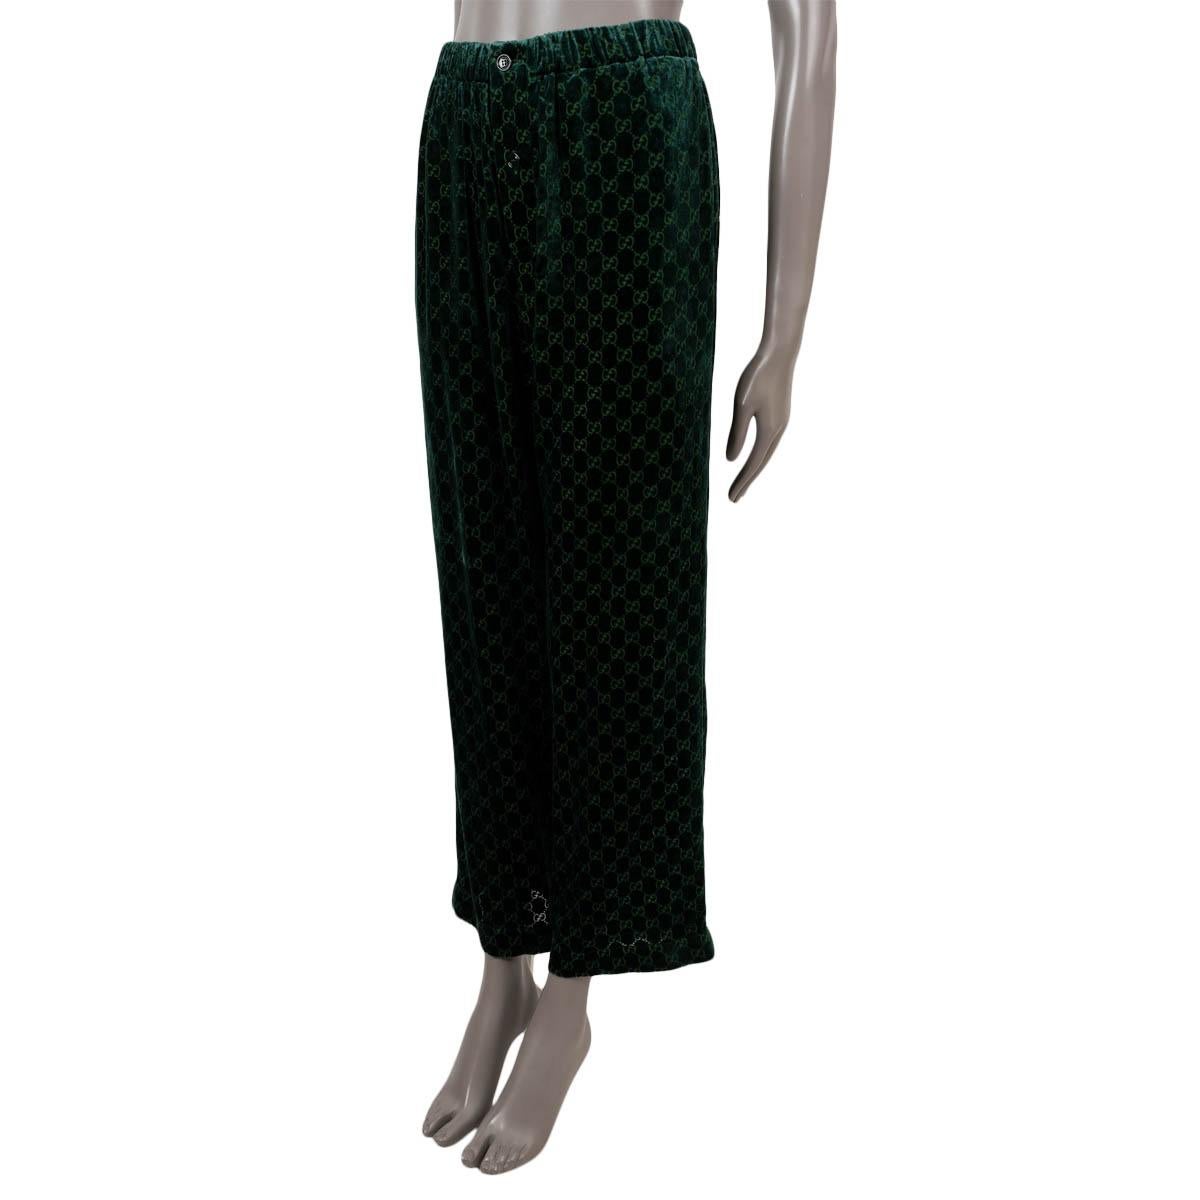 100% authentic   Gucci GG Devoré velvet pants in emerald green viscose (78%) and silk (22%). Features wide-legs, slit pockets and elastic waist brand opens with buttons on the front. Unlined. Has been worn and is in excellent condition.

Complete